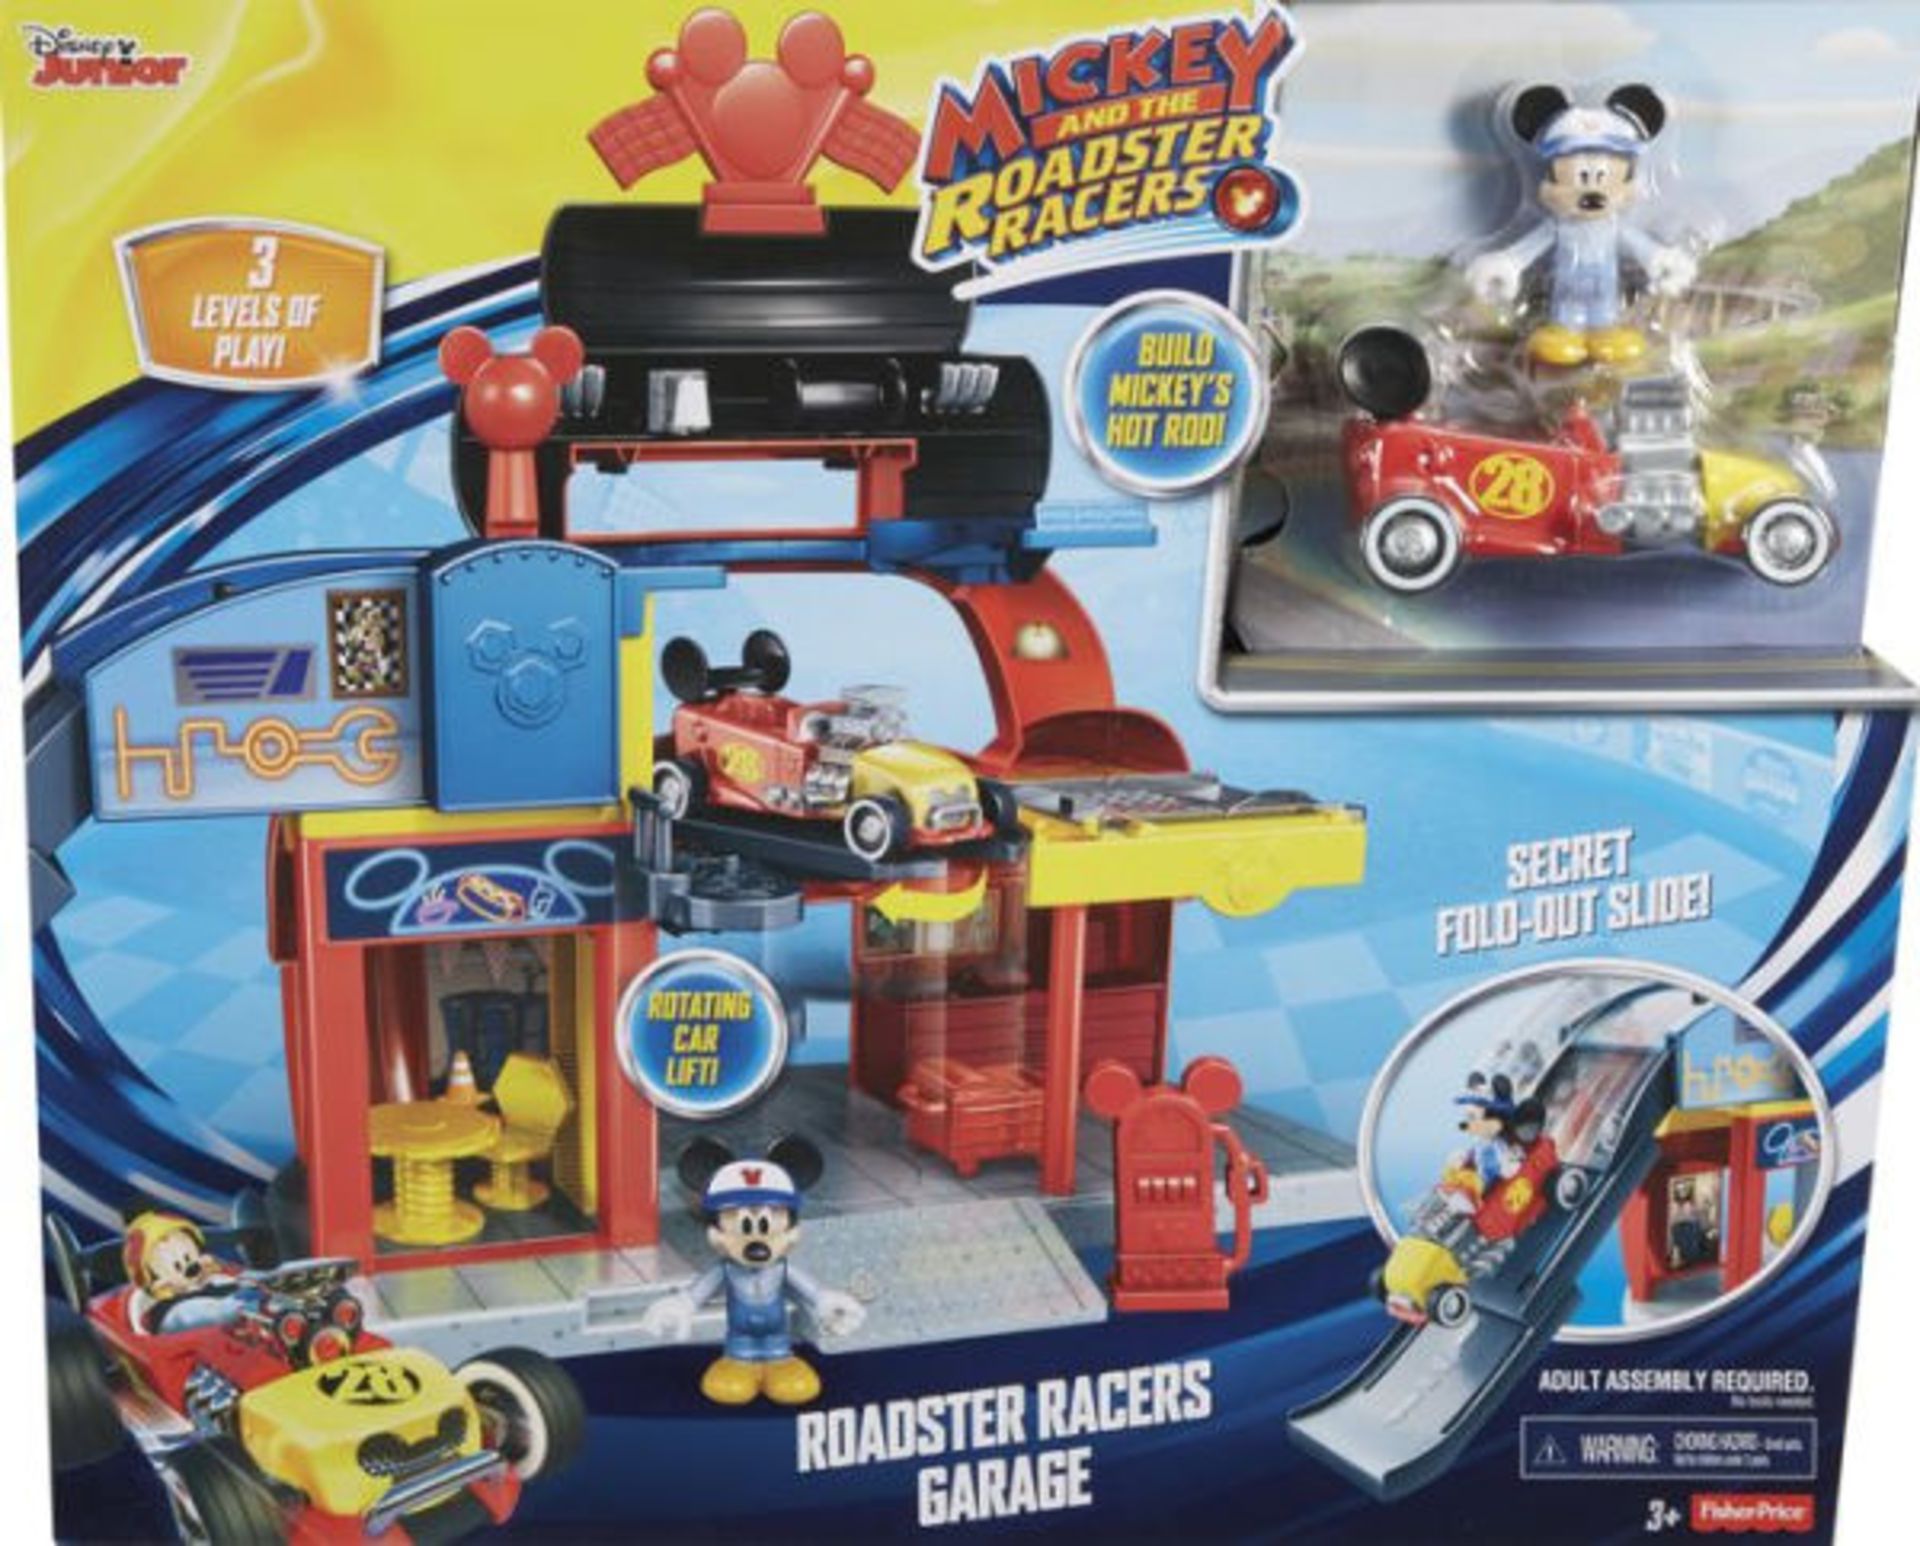 V Brand New Disneys Mickey and the Roadster Racers Garage - 3 Levels of Play - Rotating Car Lift -